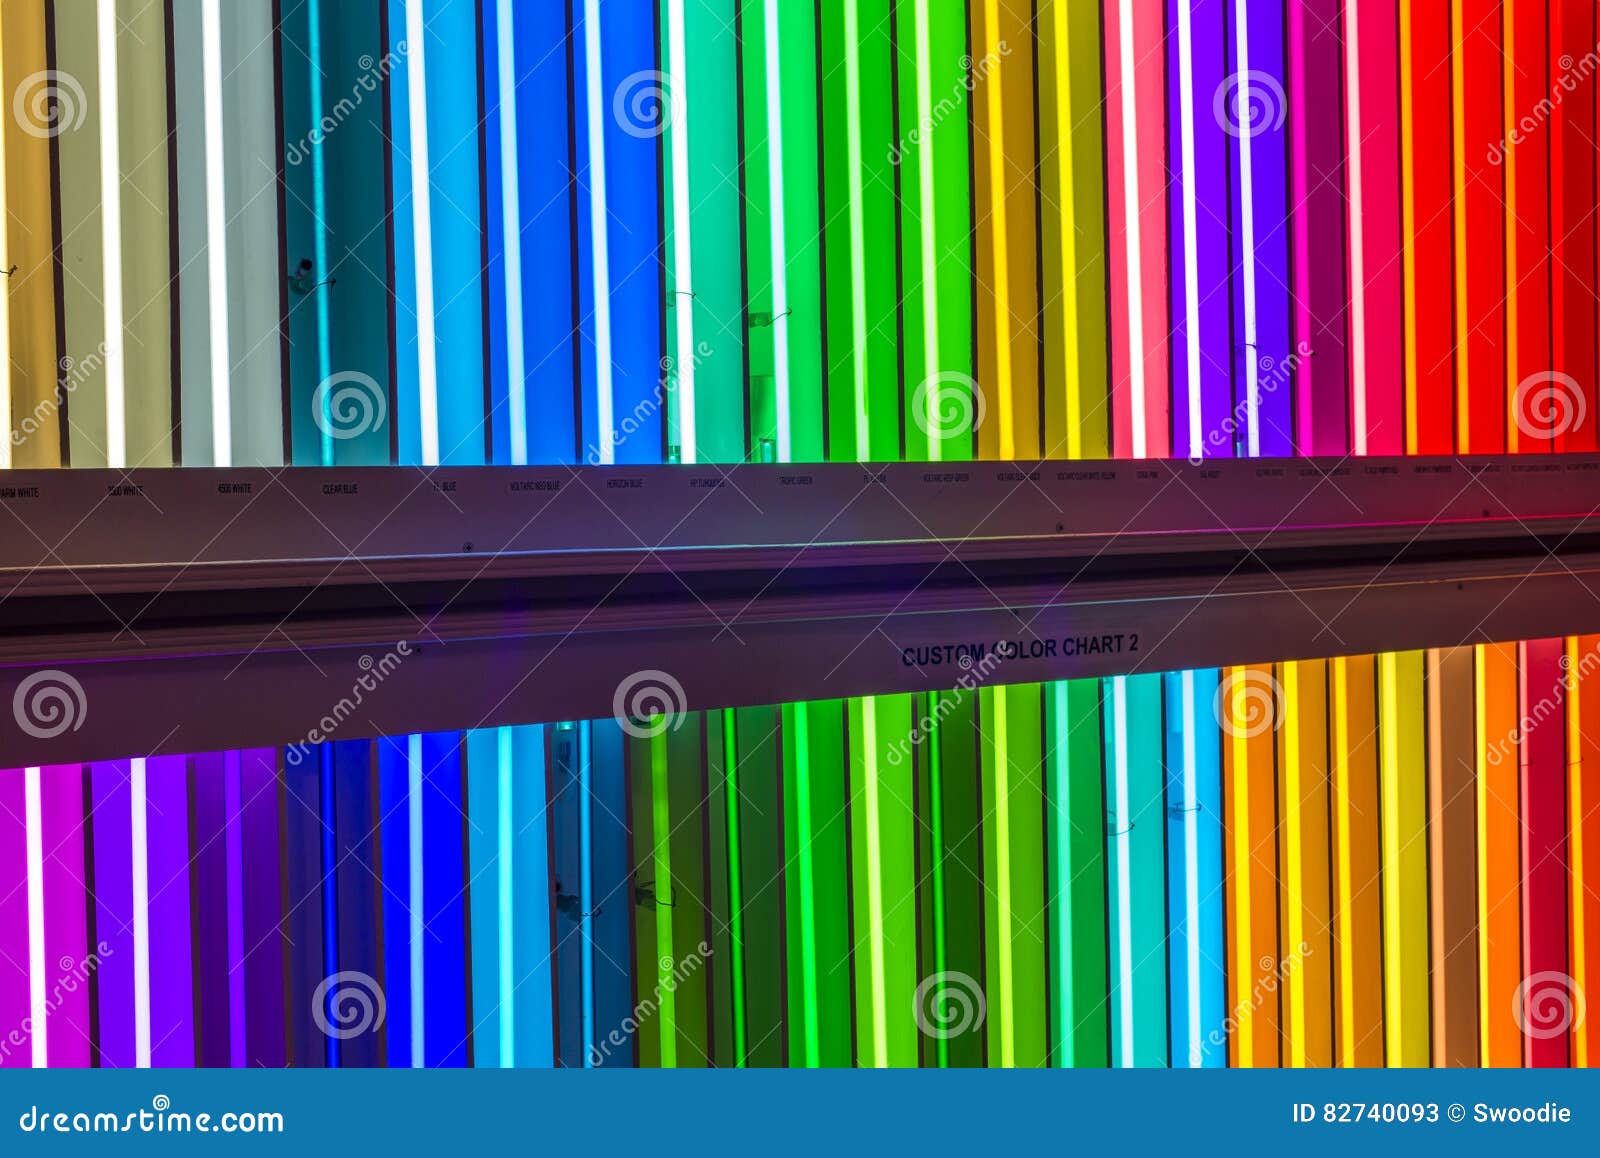 Neon Color Chart